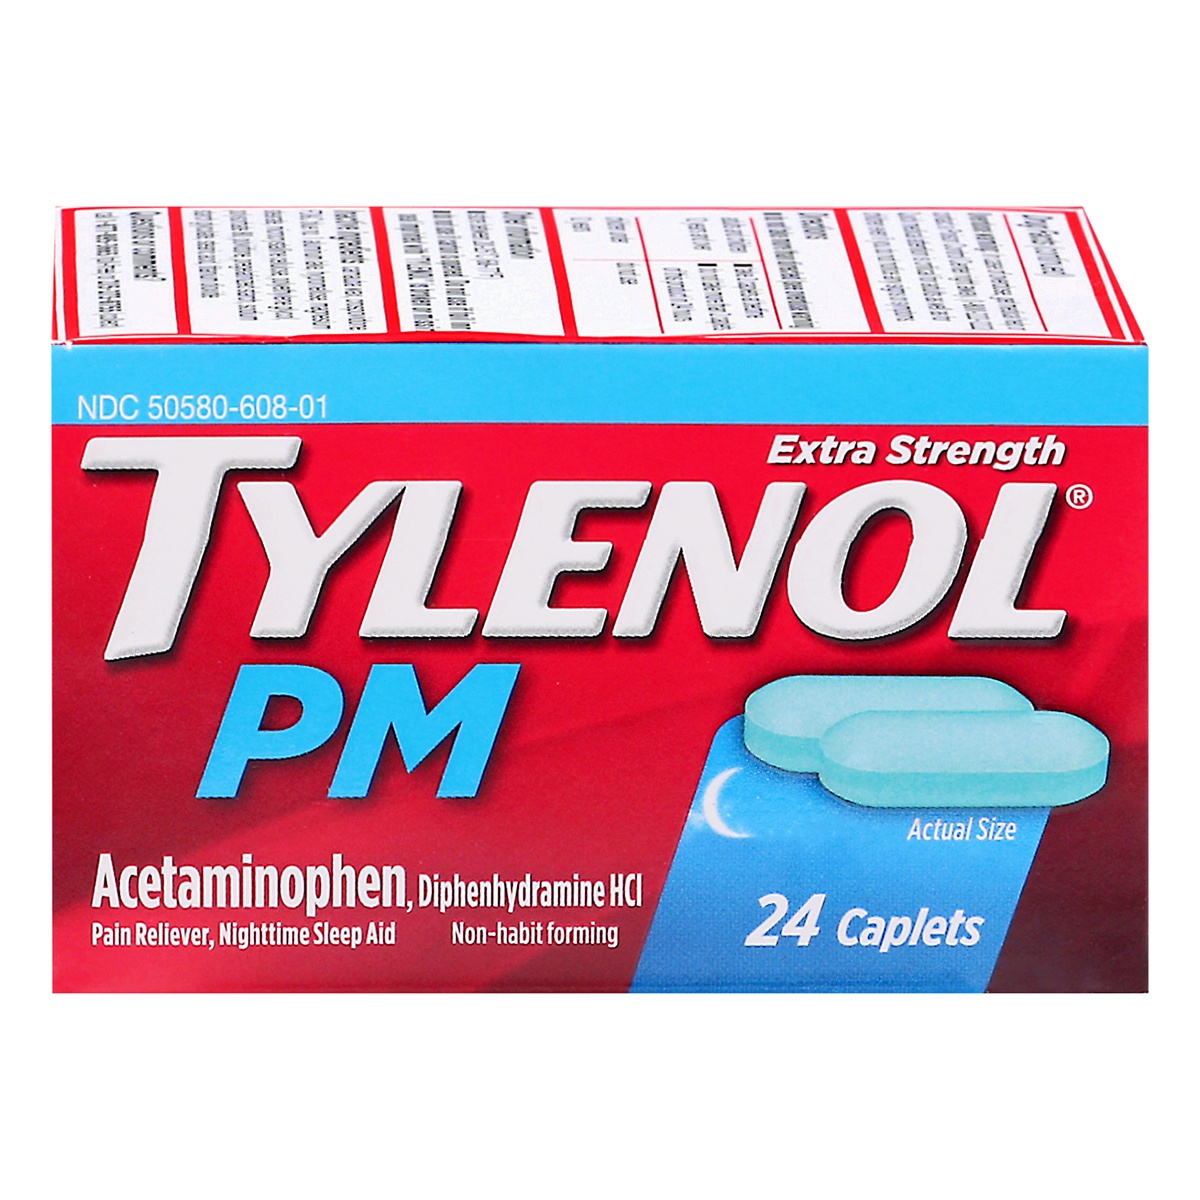 slide 1 of 10, Tylenol PM Extra Strength Nighttime Pain Reliever & Sleep Aid Caplets Acetaminophen & Diphenhydramine HCl, Relief for Nighttime Aches & Pains, Non-Habit Forming, 24 ct